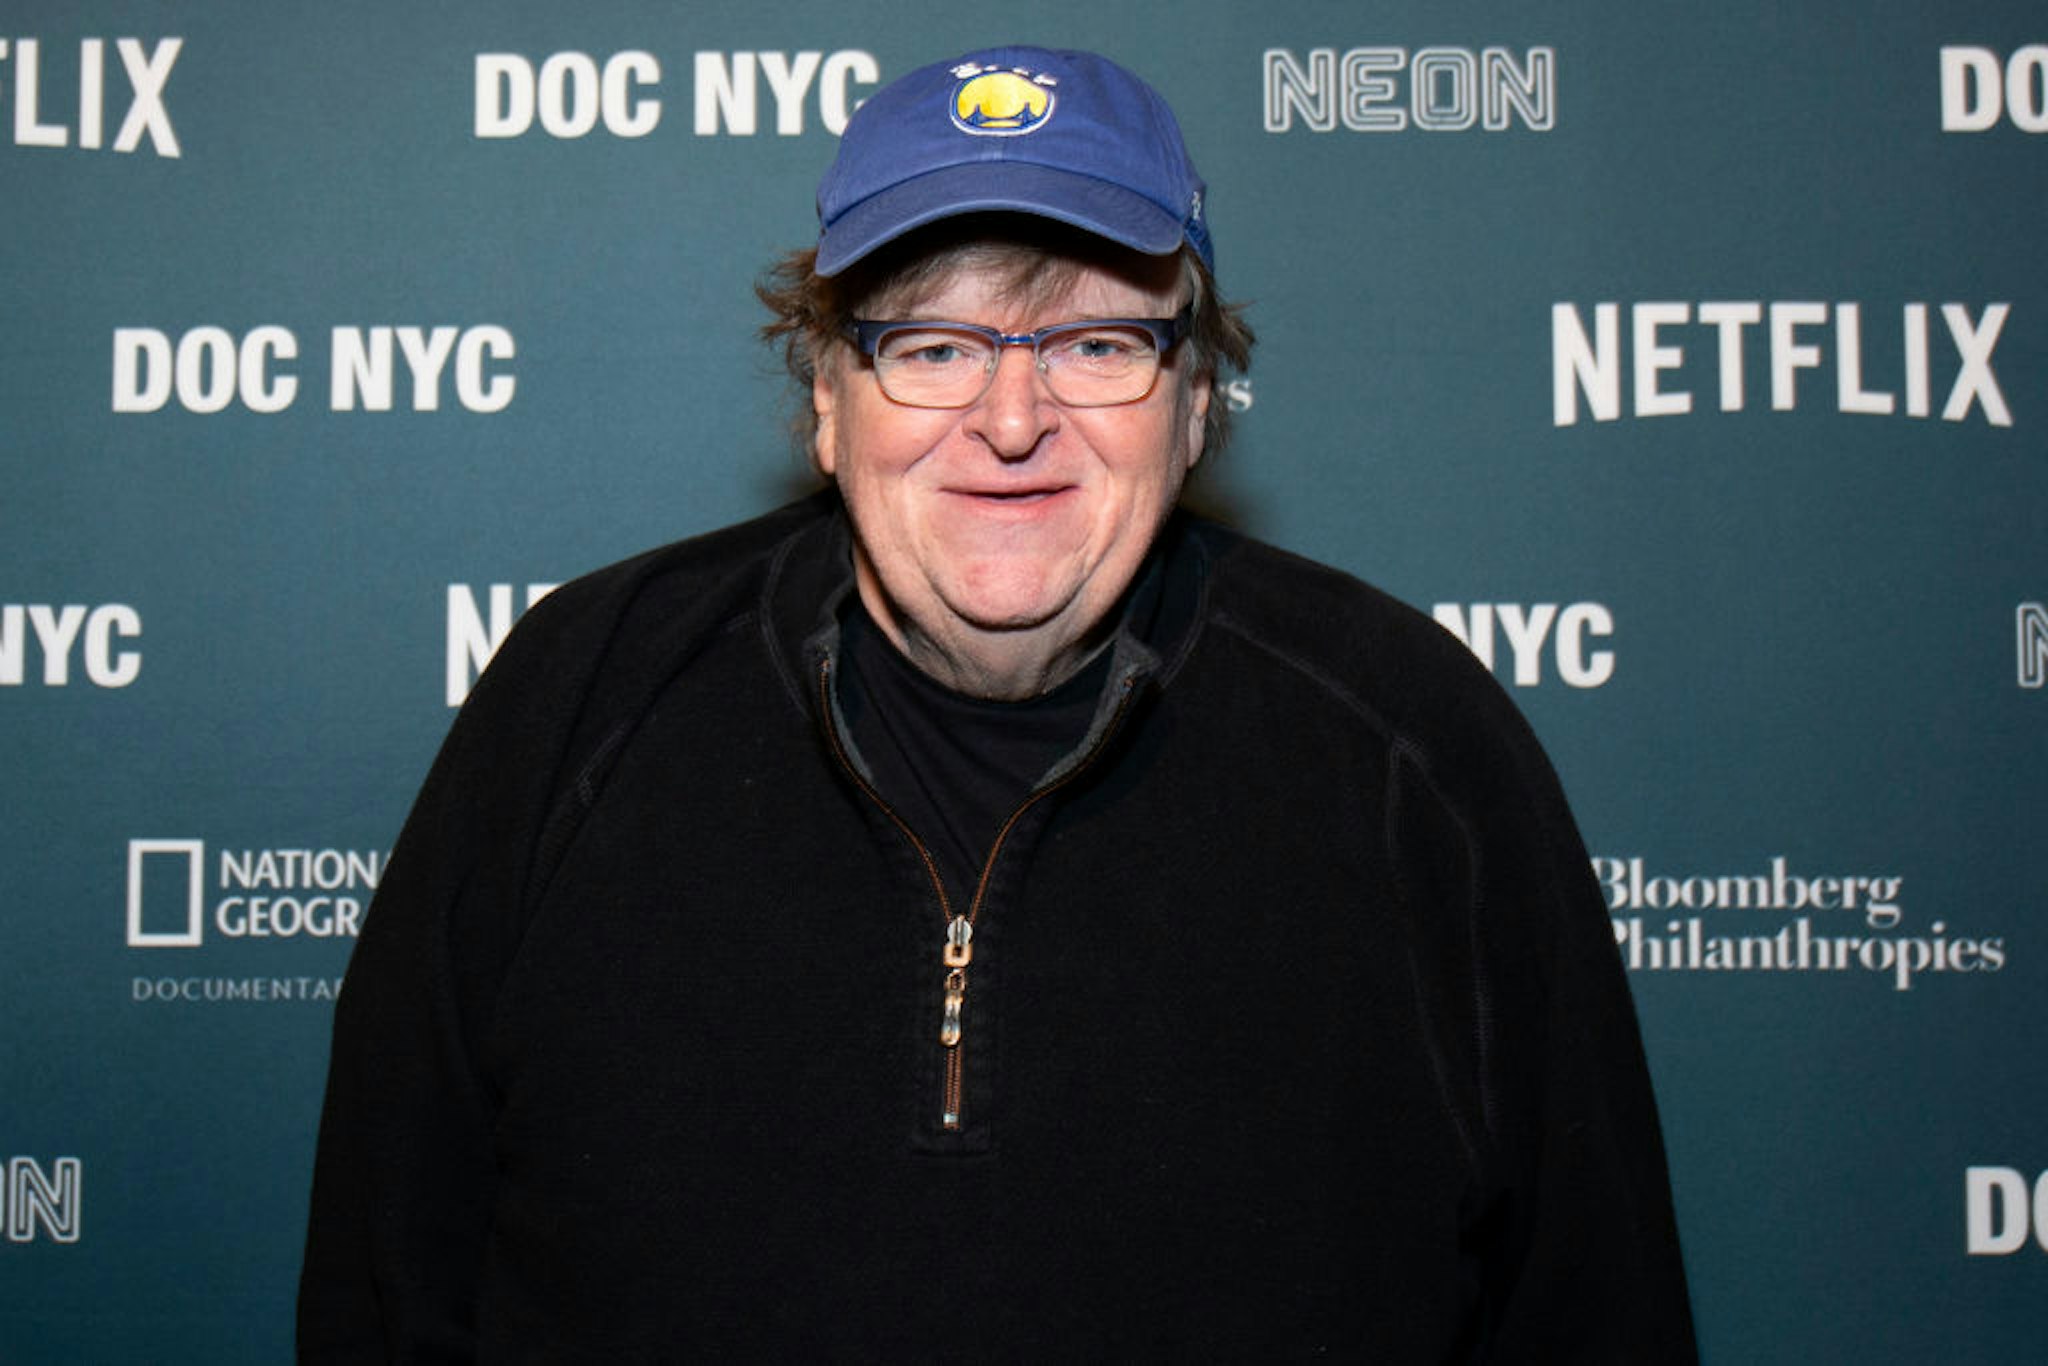 Michael Moore attends the 6th Annual DOC NYC Visionaries Tribute at Gotham Hall on November 07, 2019 in New York City.